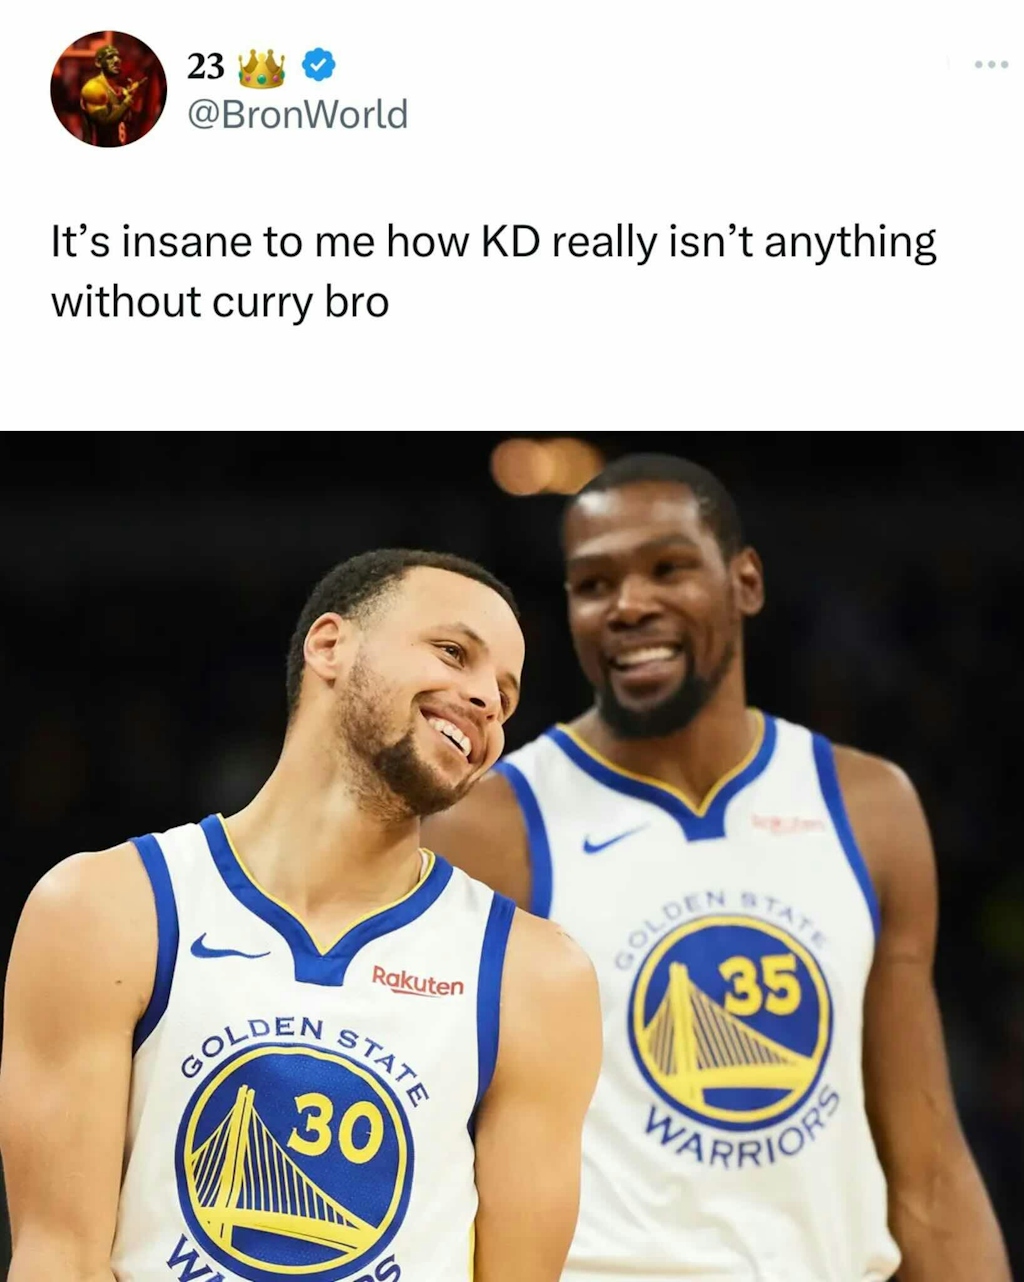 KD’s career hasn’t been the same since he left the Warriors 💀